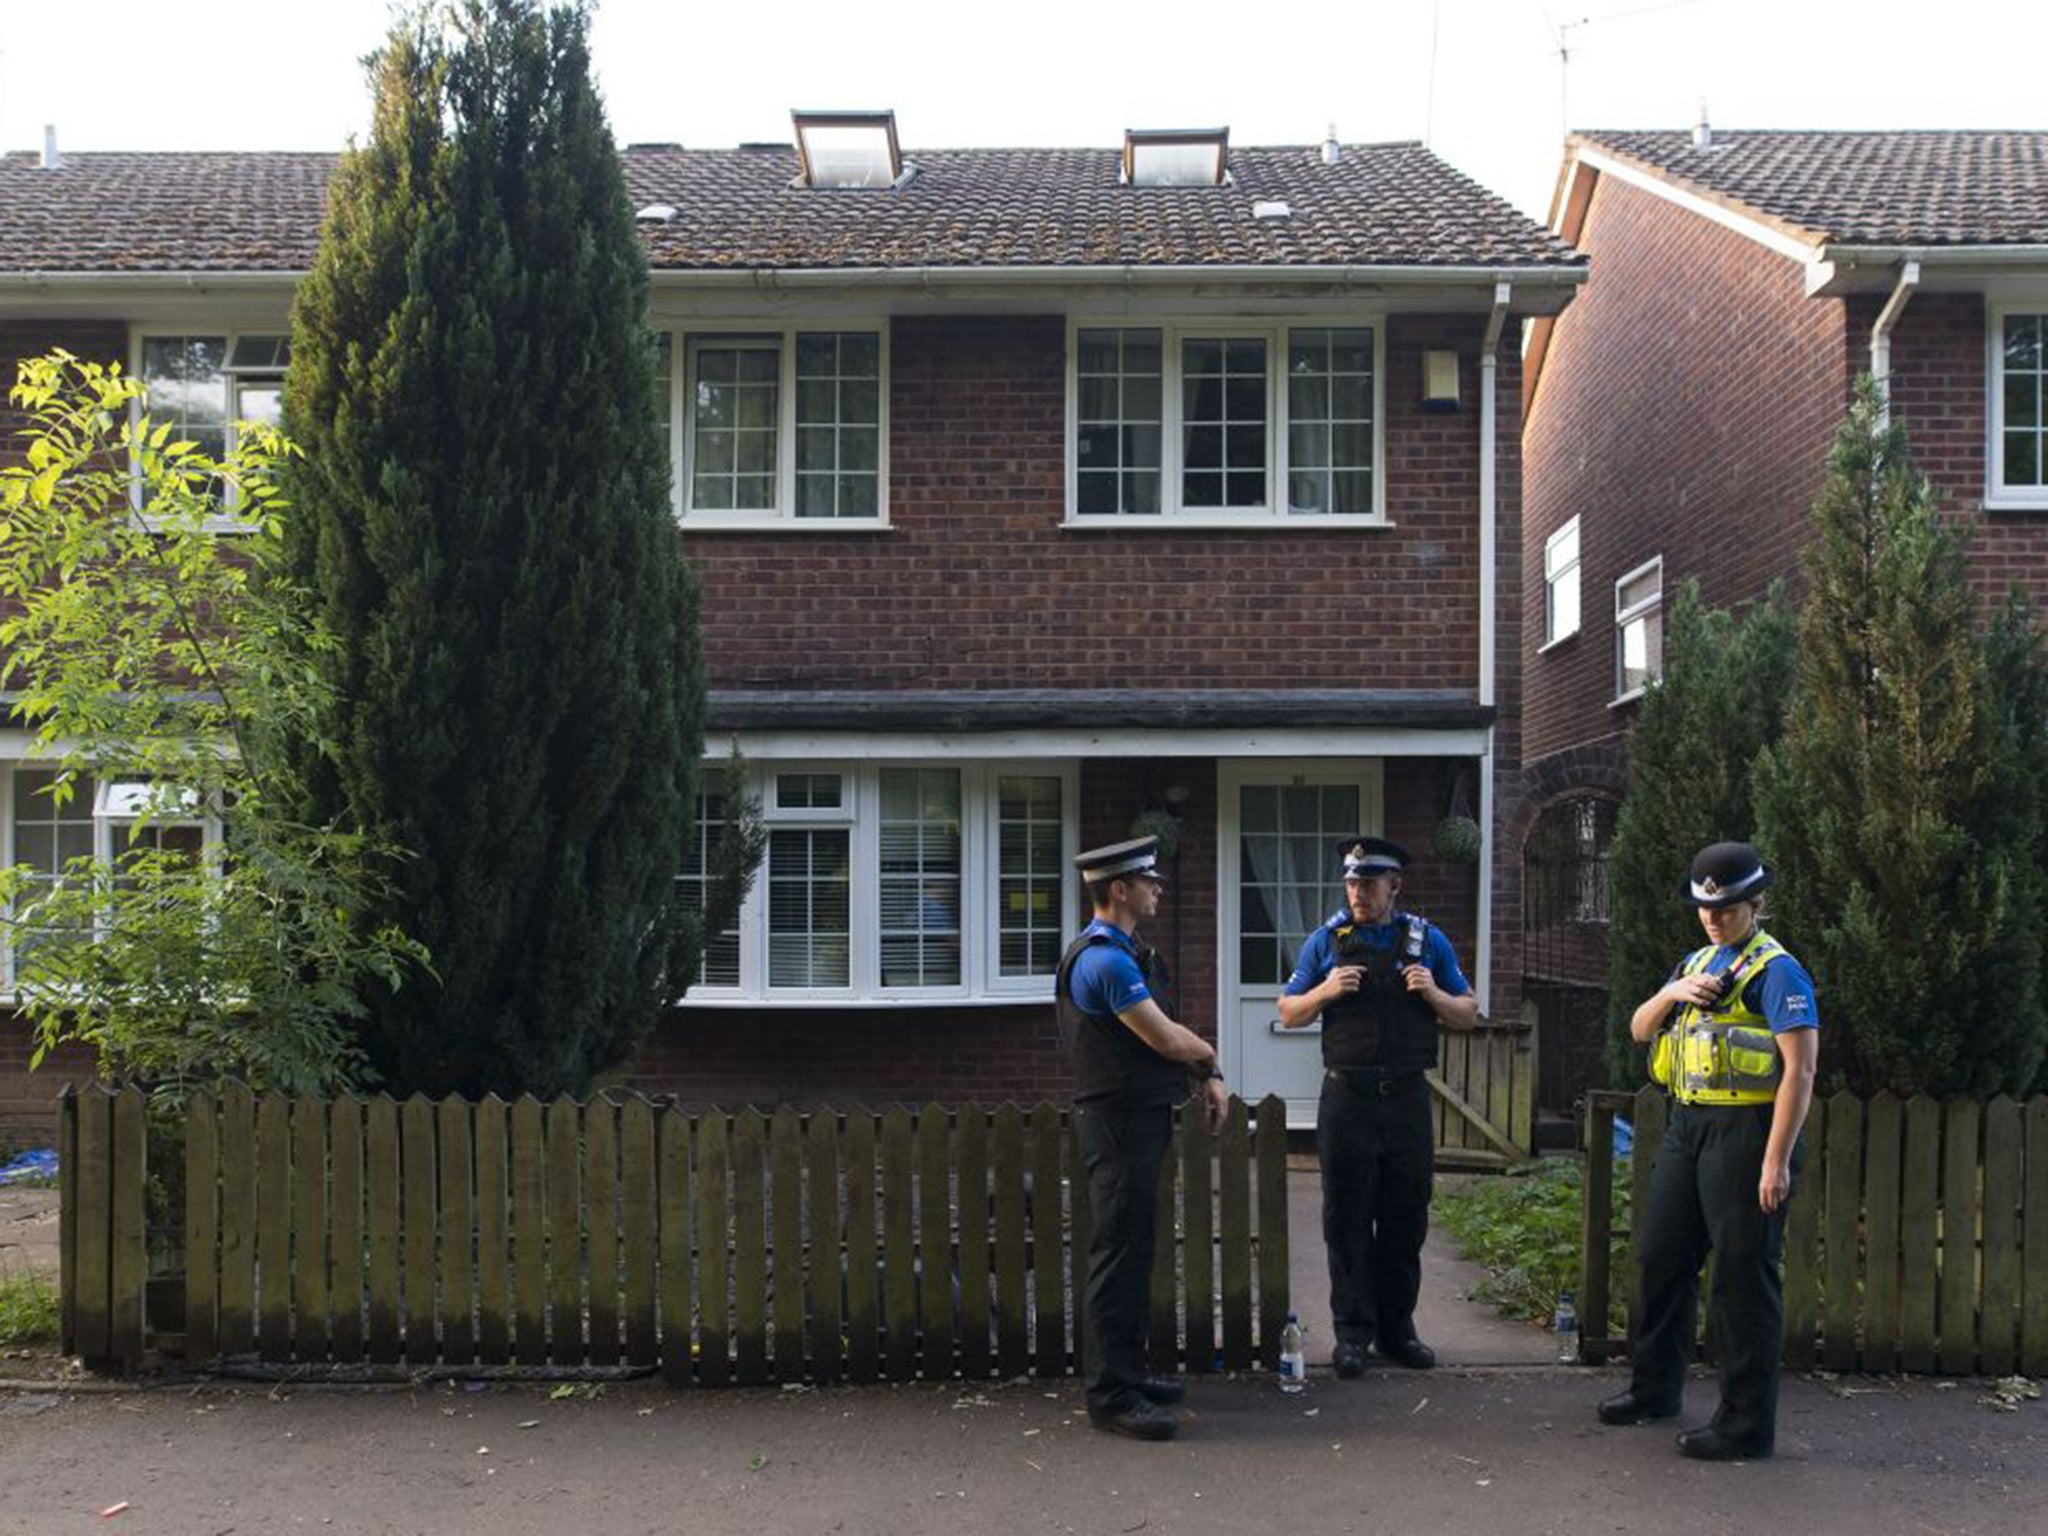 Darren Osborne is believed to have lived in this house on Glyn Rhosyn, Pentwyn, Cardiff